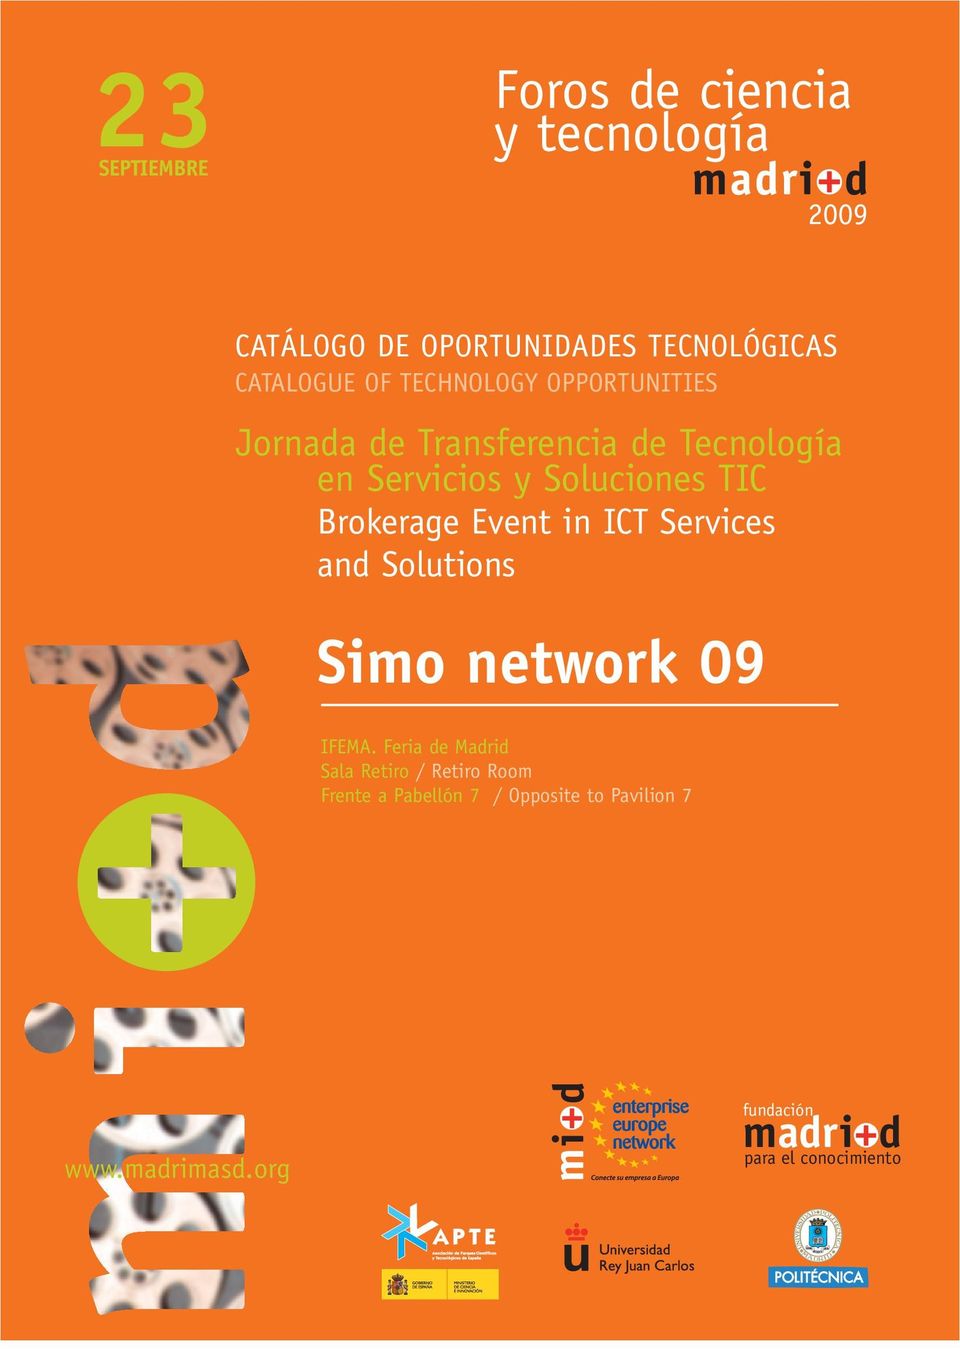 Brokerage Event in ICT Services and Solutions Simo network 09 IFEMA.